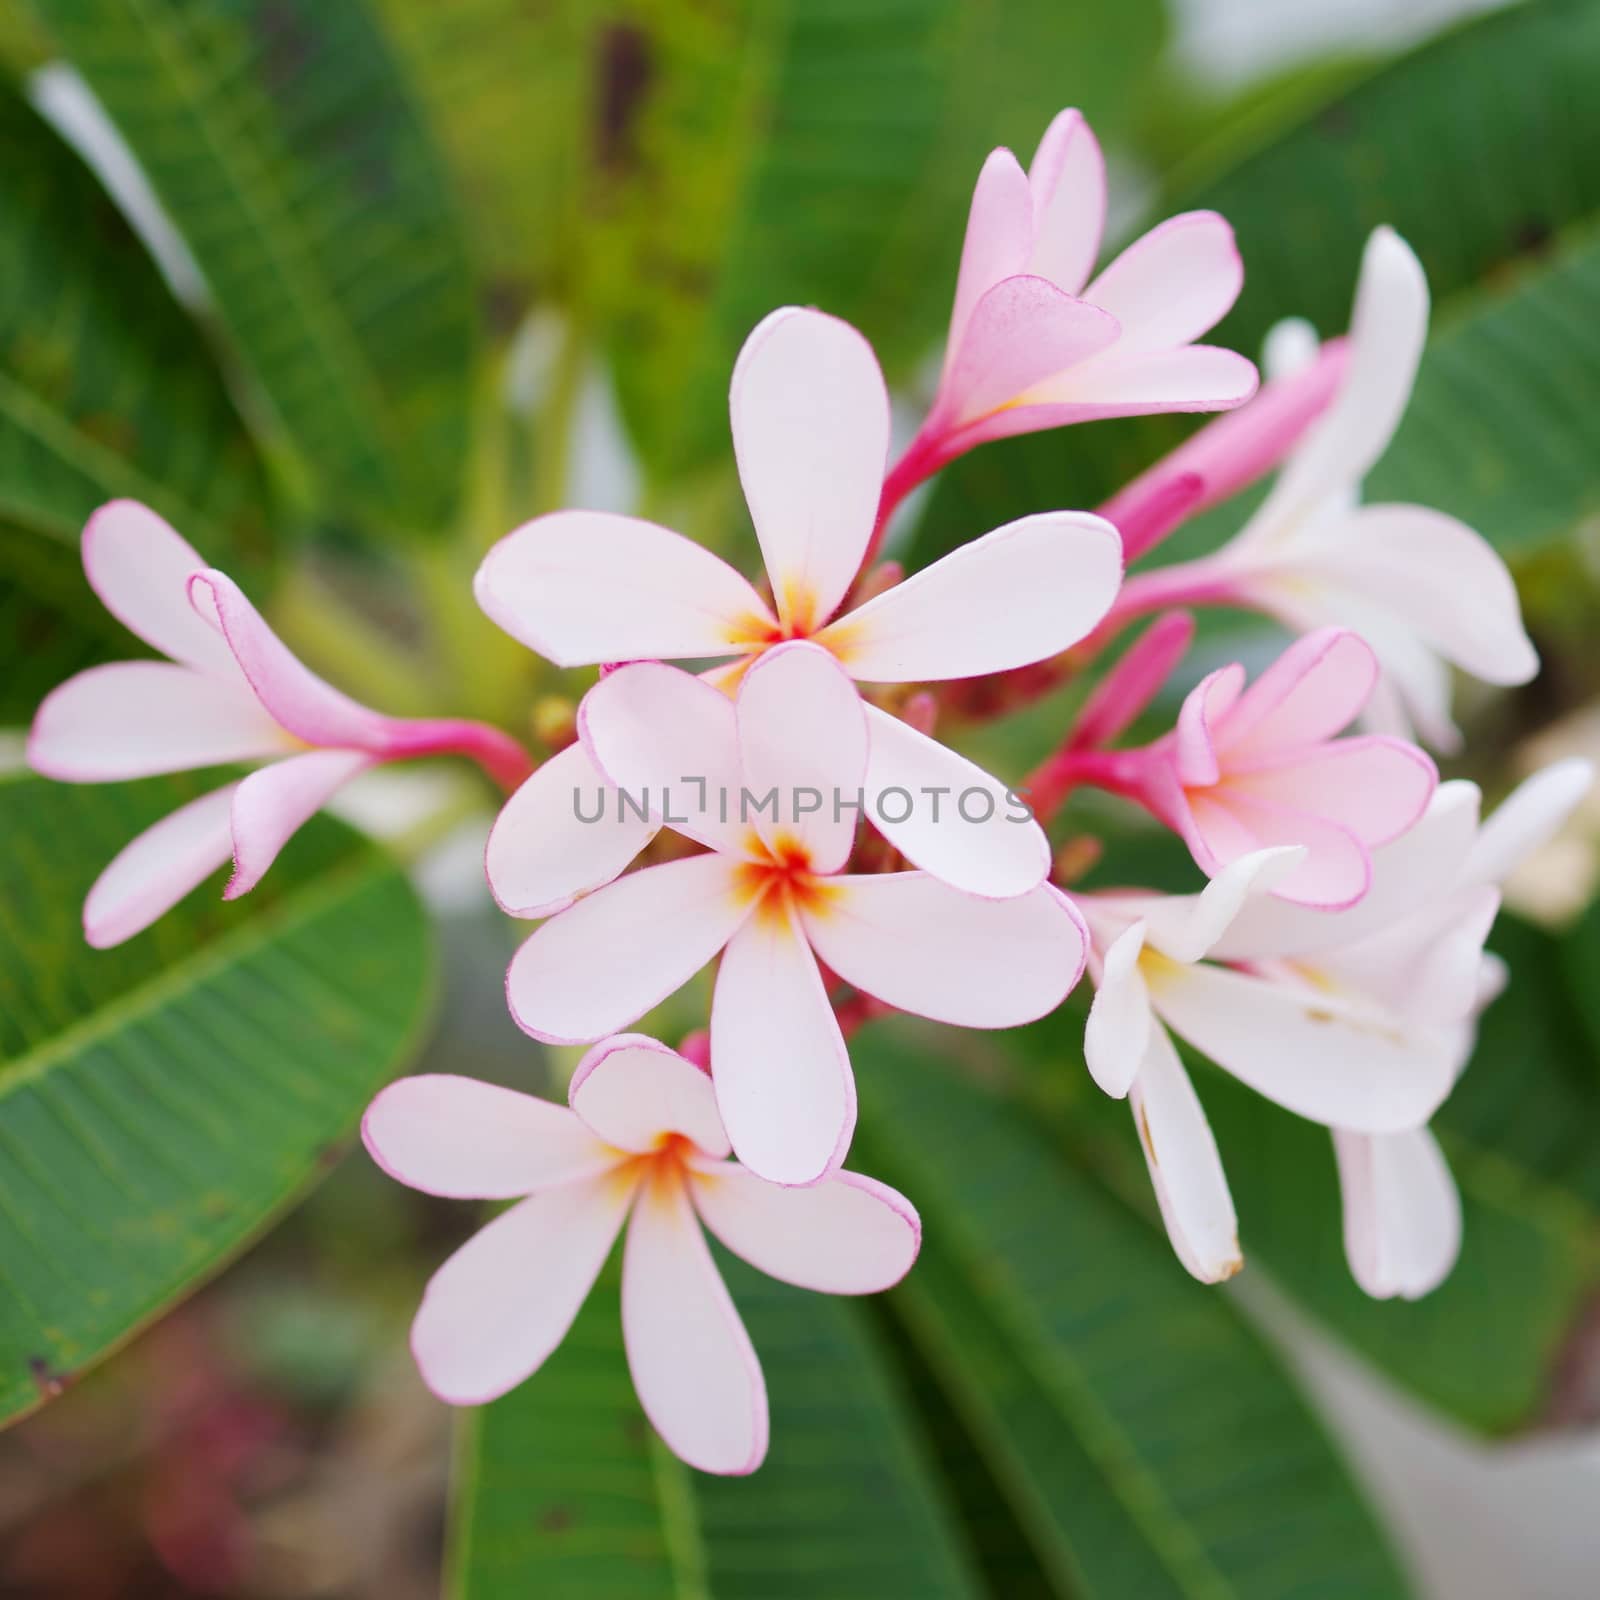 Frangipani flower in pink and white color